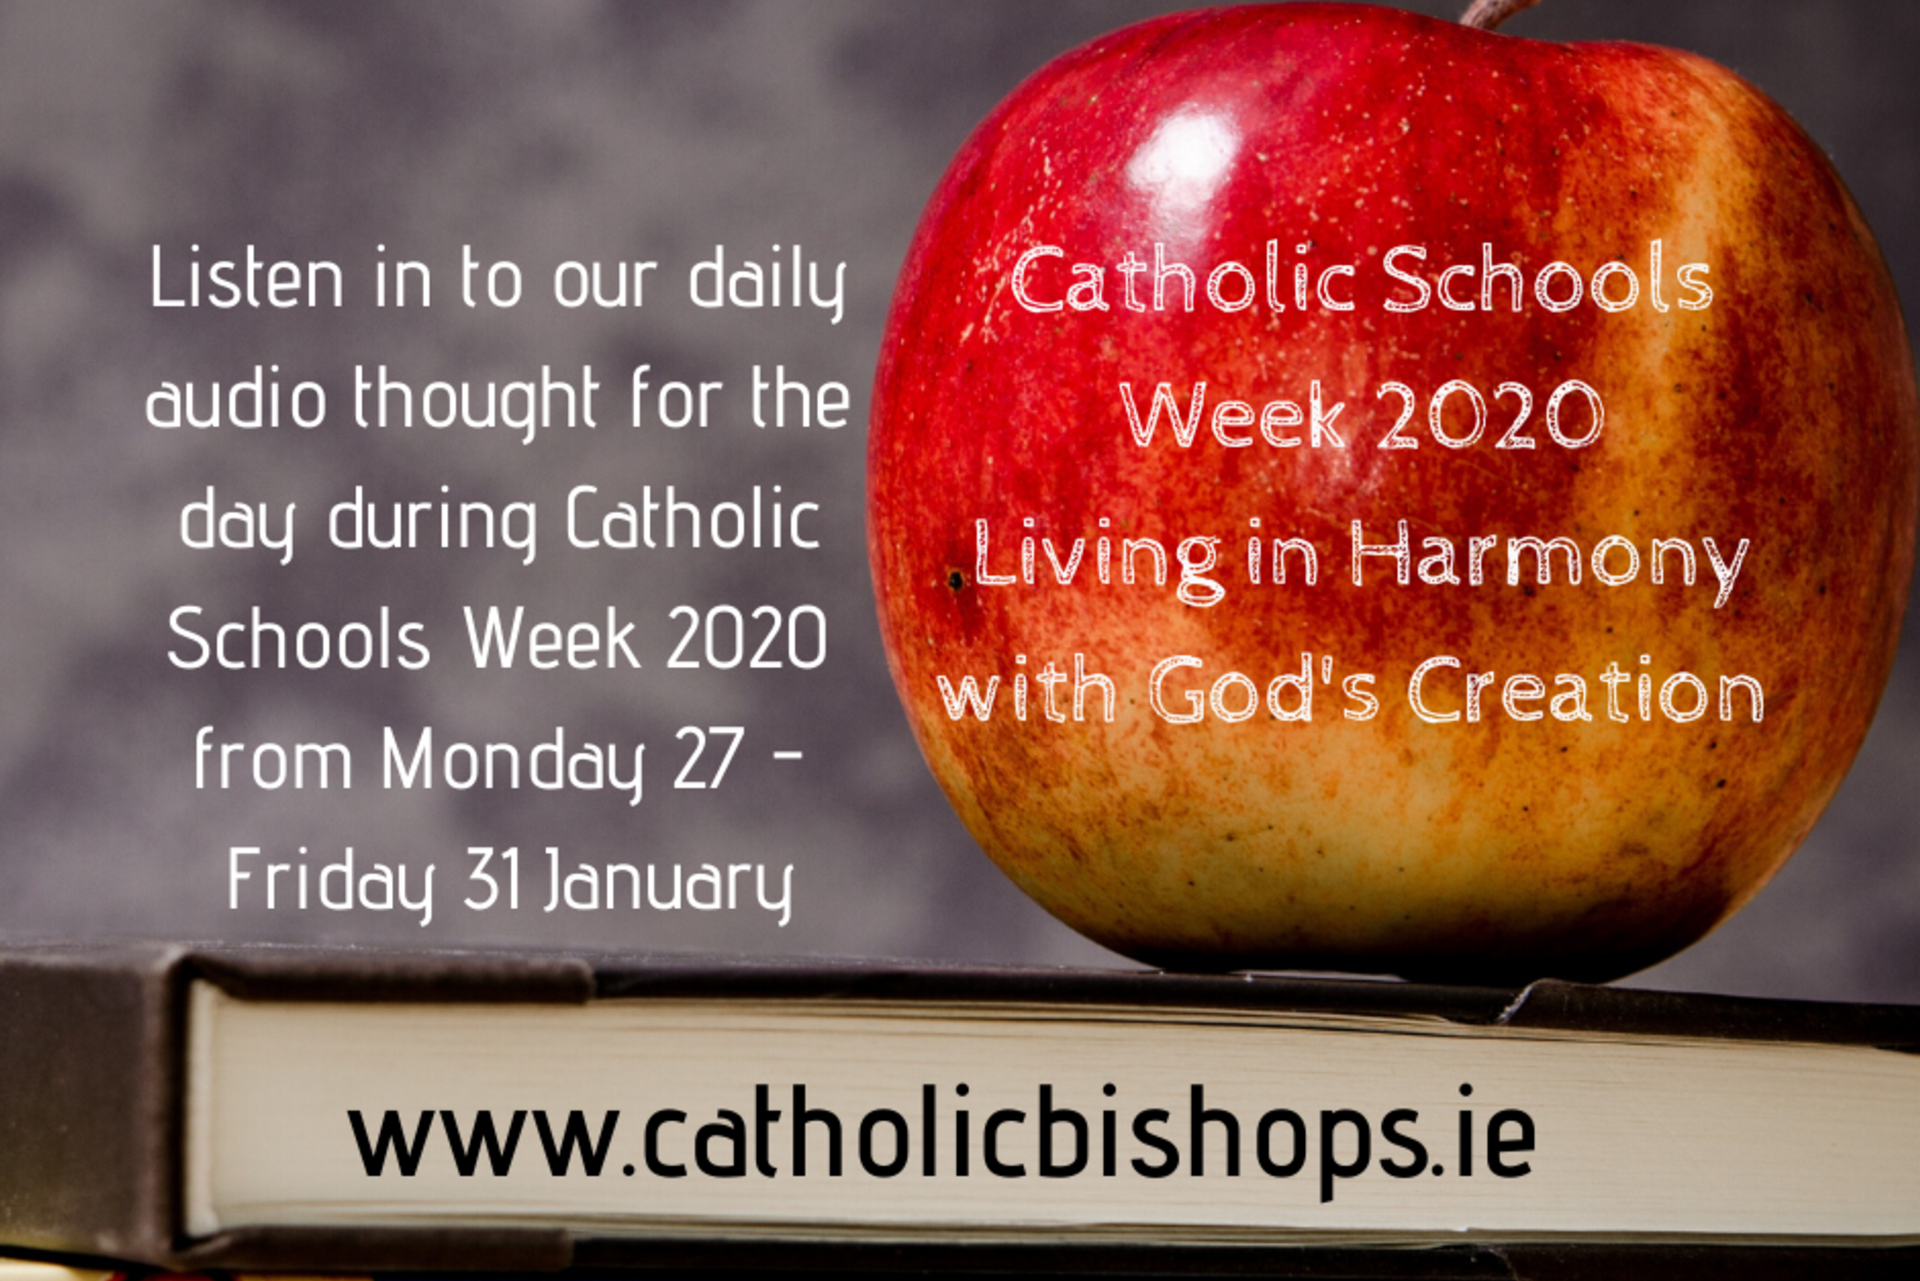 New audio and Resources for Wednesday of Catholic Schools Week 2020